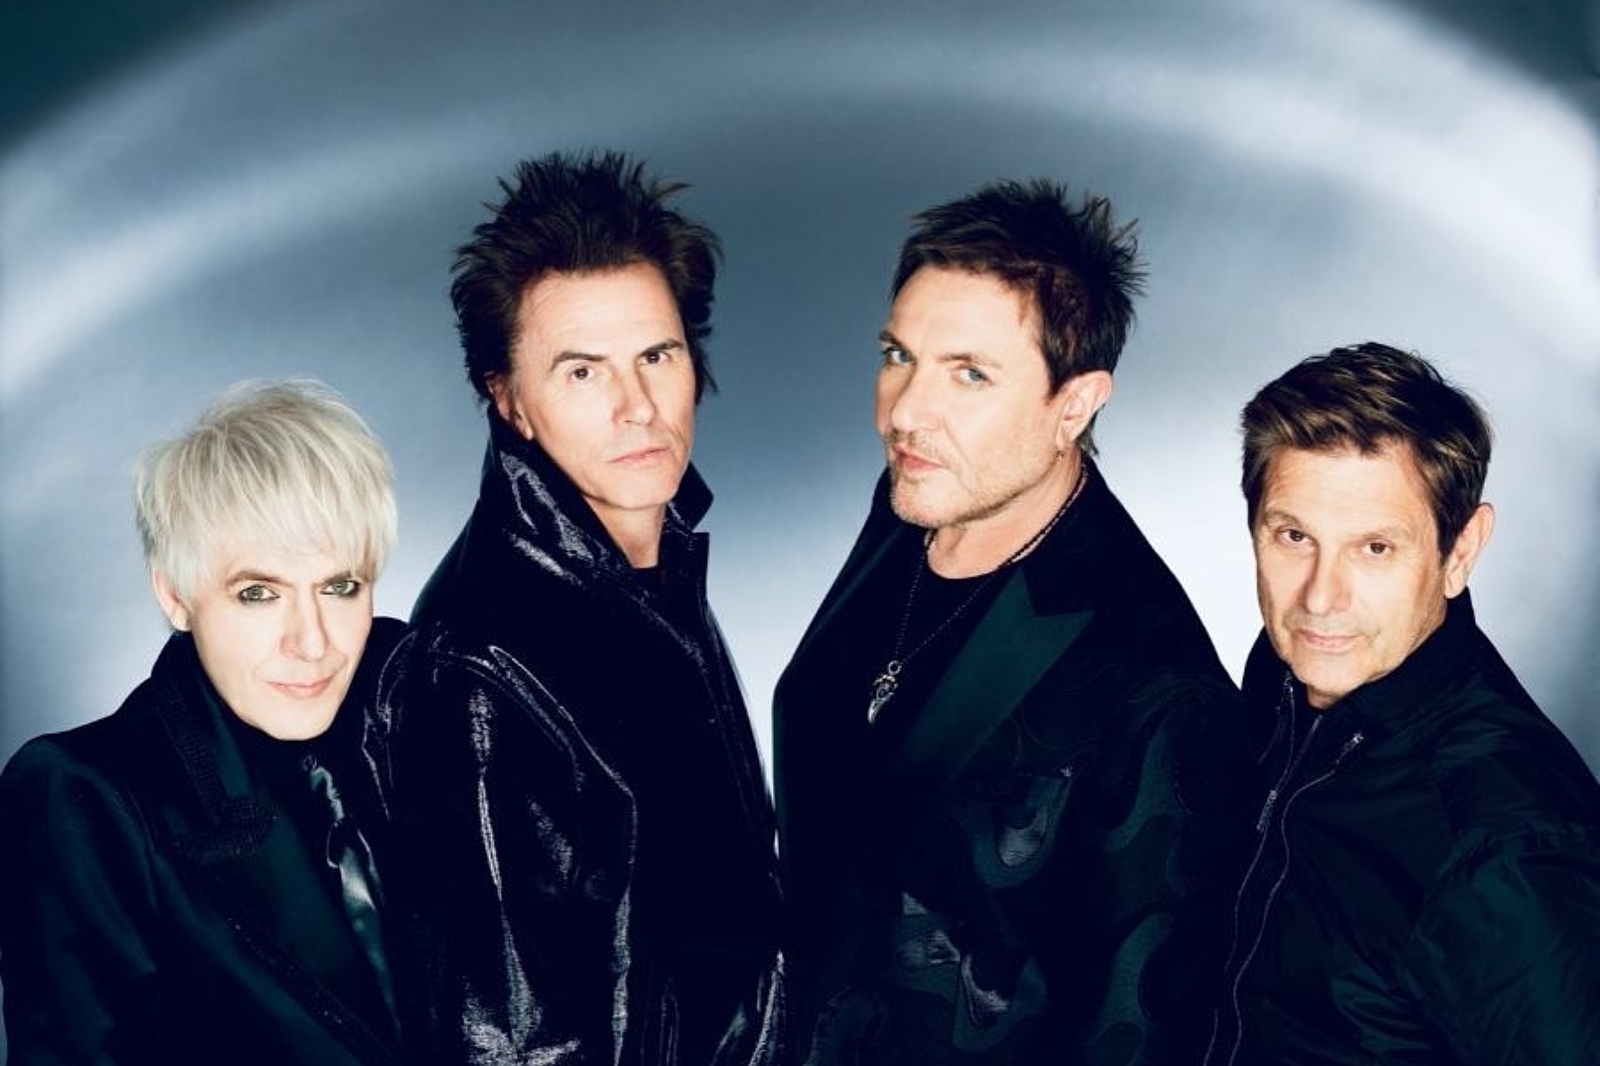 Duran Duran team up with CHAI for new track 'More Joy'